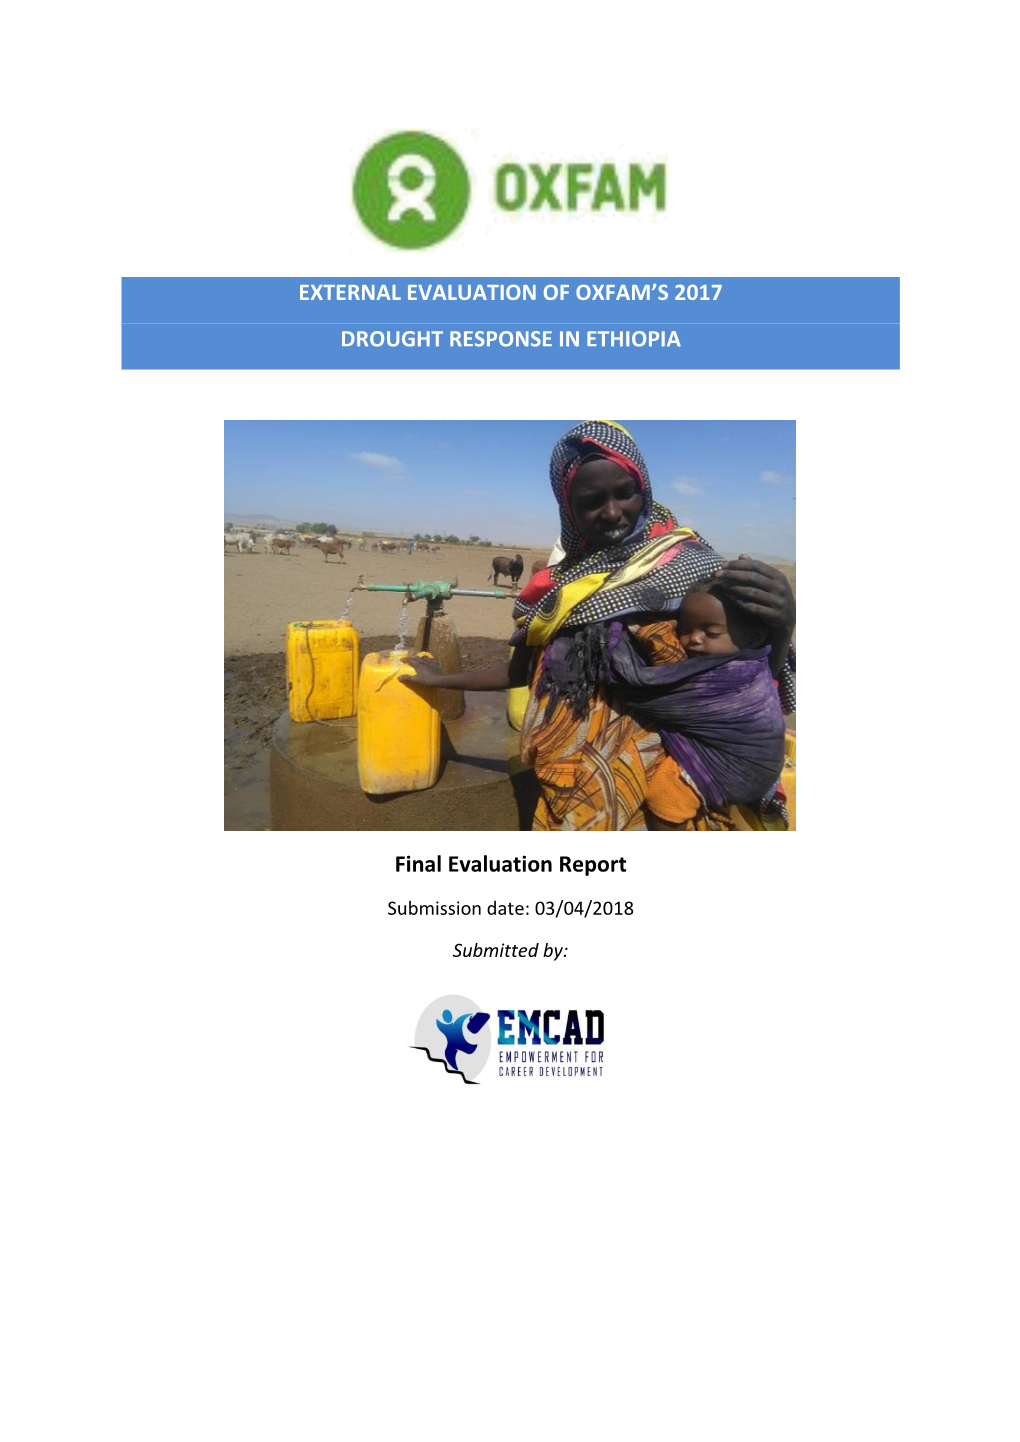 External Evaluation of Oxfam's 2017 Drought Response in Ethiopia